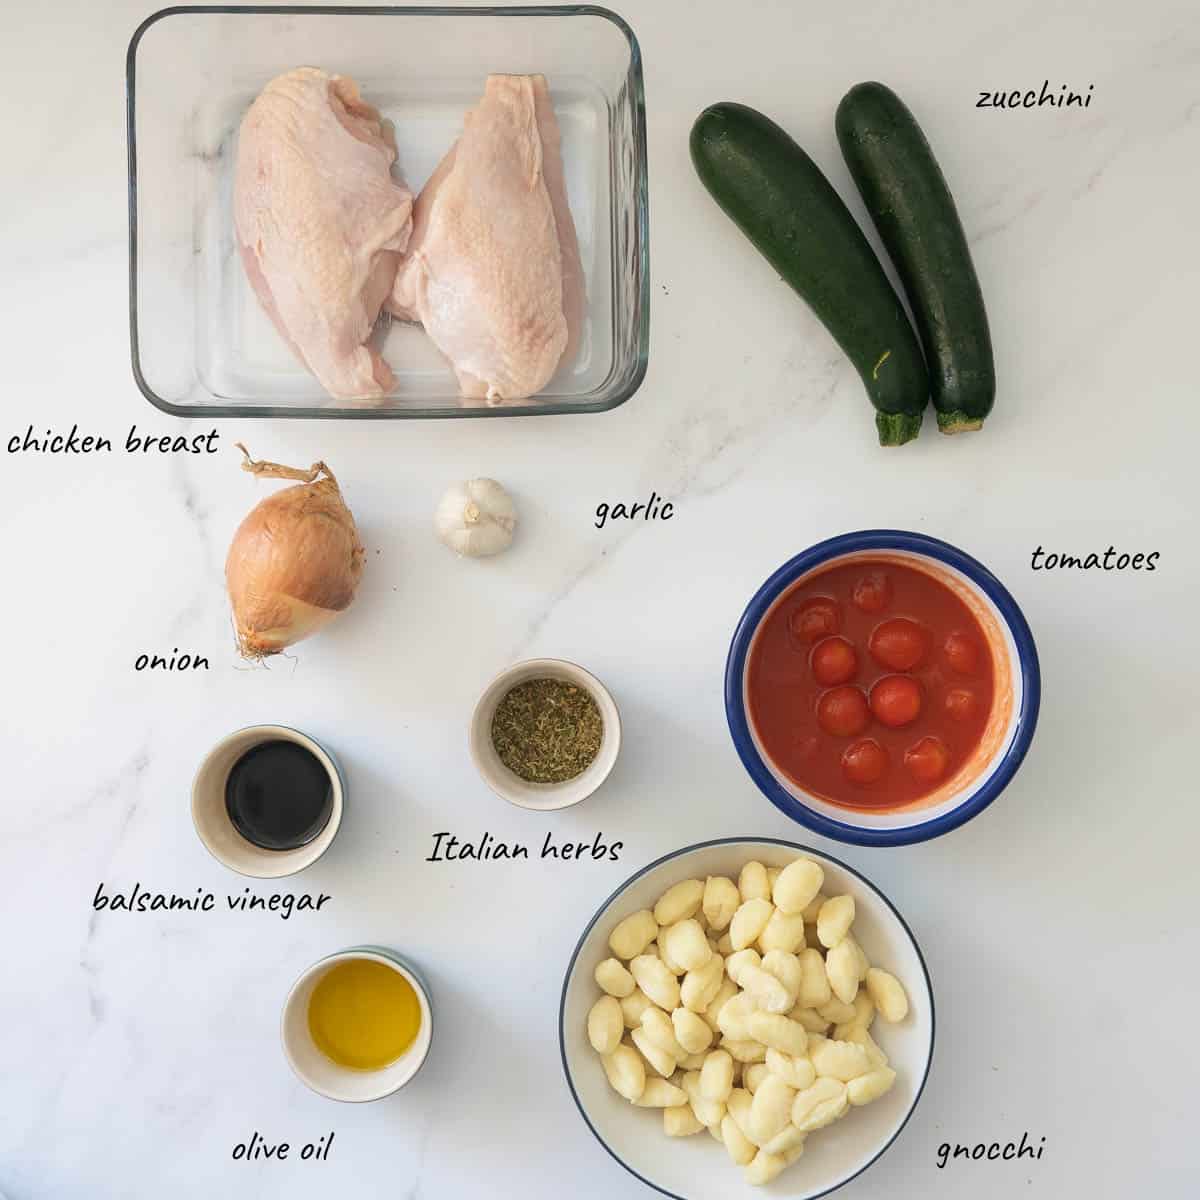 The ingredients to make chicken gnocchi bake laid out on a bench top.